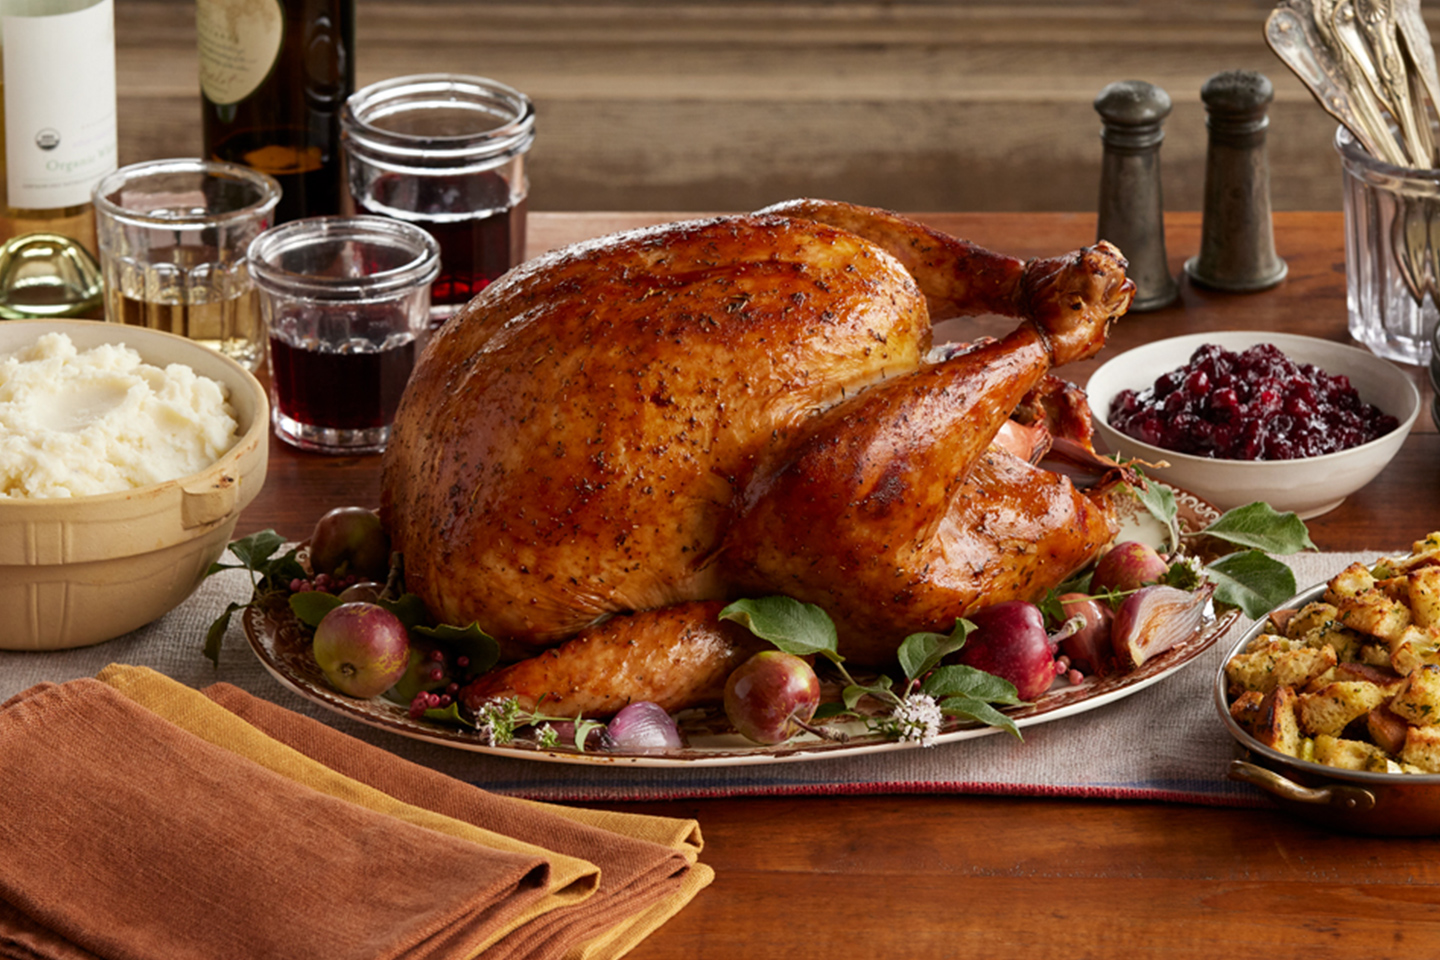 A holiday table with roasted turkey on a serving platter with cranberry sauce, bread stuffing, and mashed potatoes on the side.